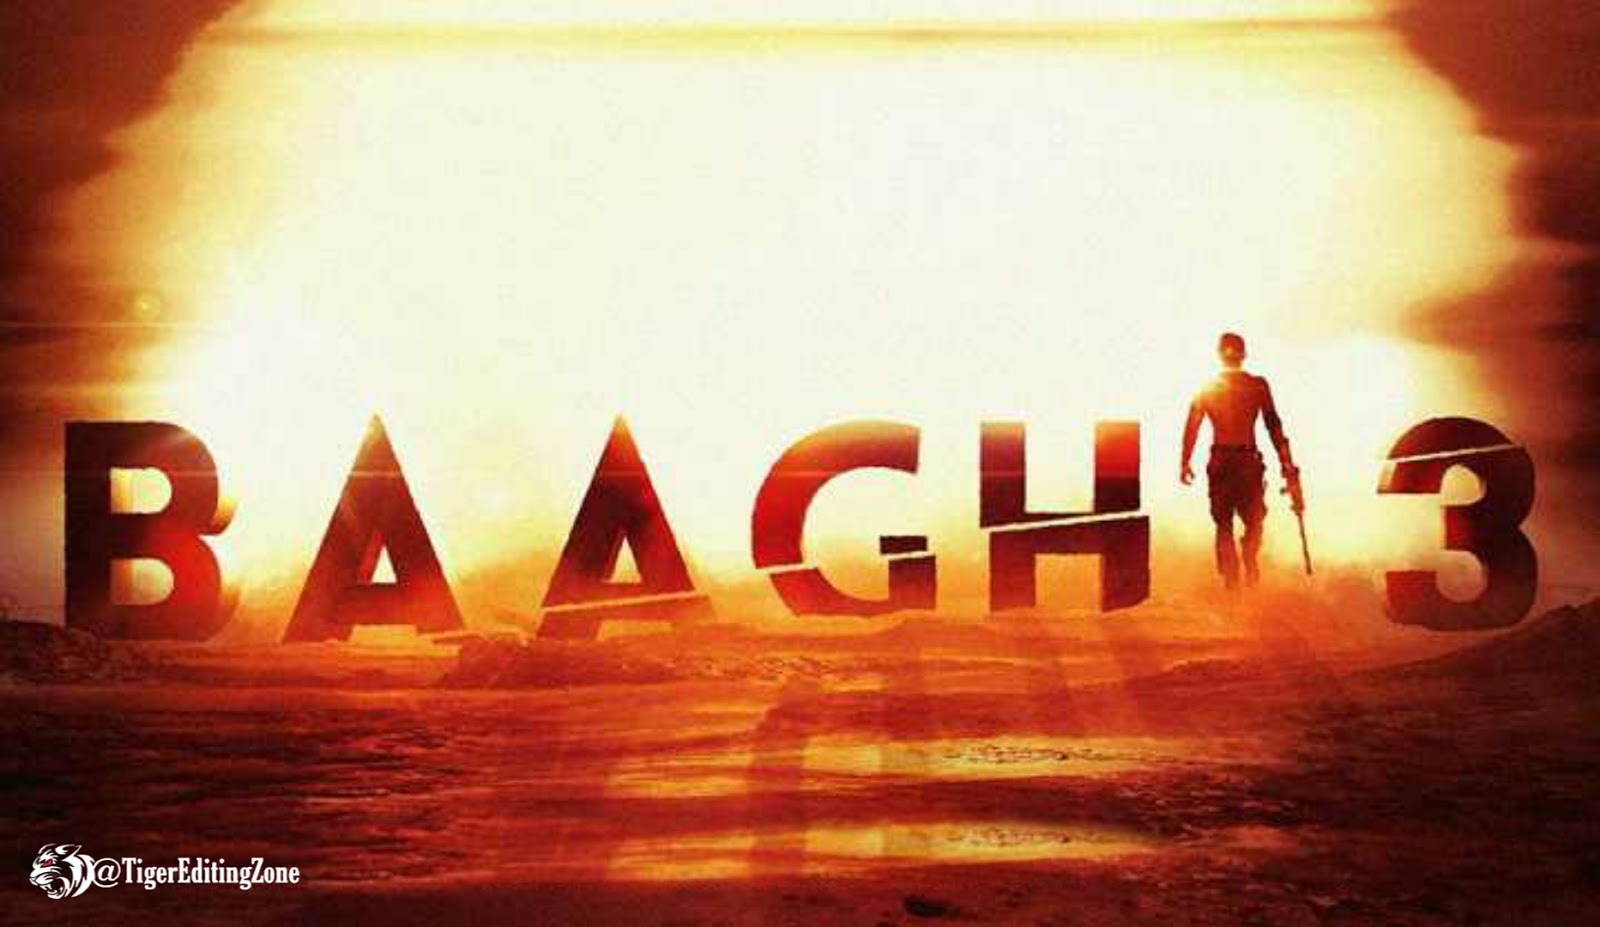 Baaghi 3 Photo Editing Background | Baaghi 3 Movie Poster for Editing